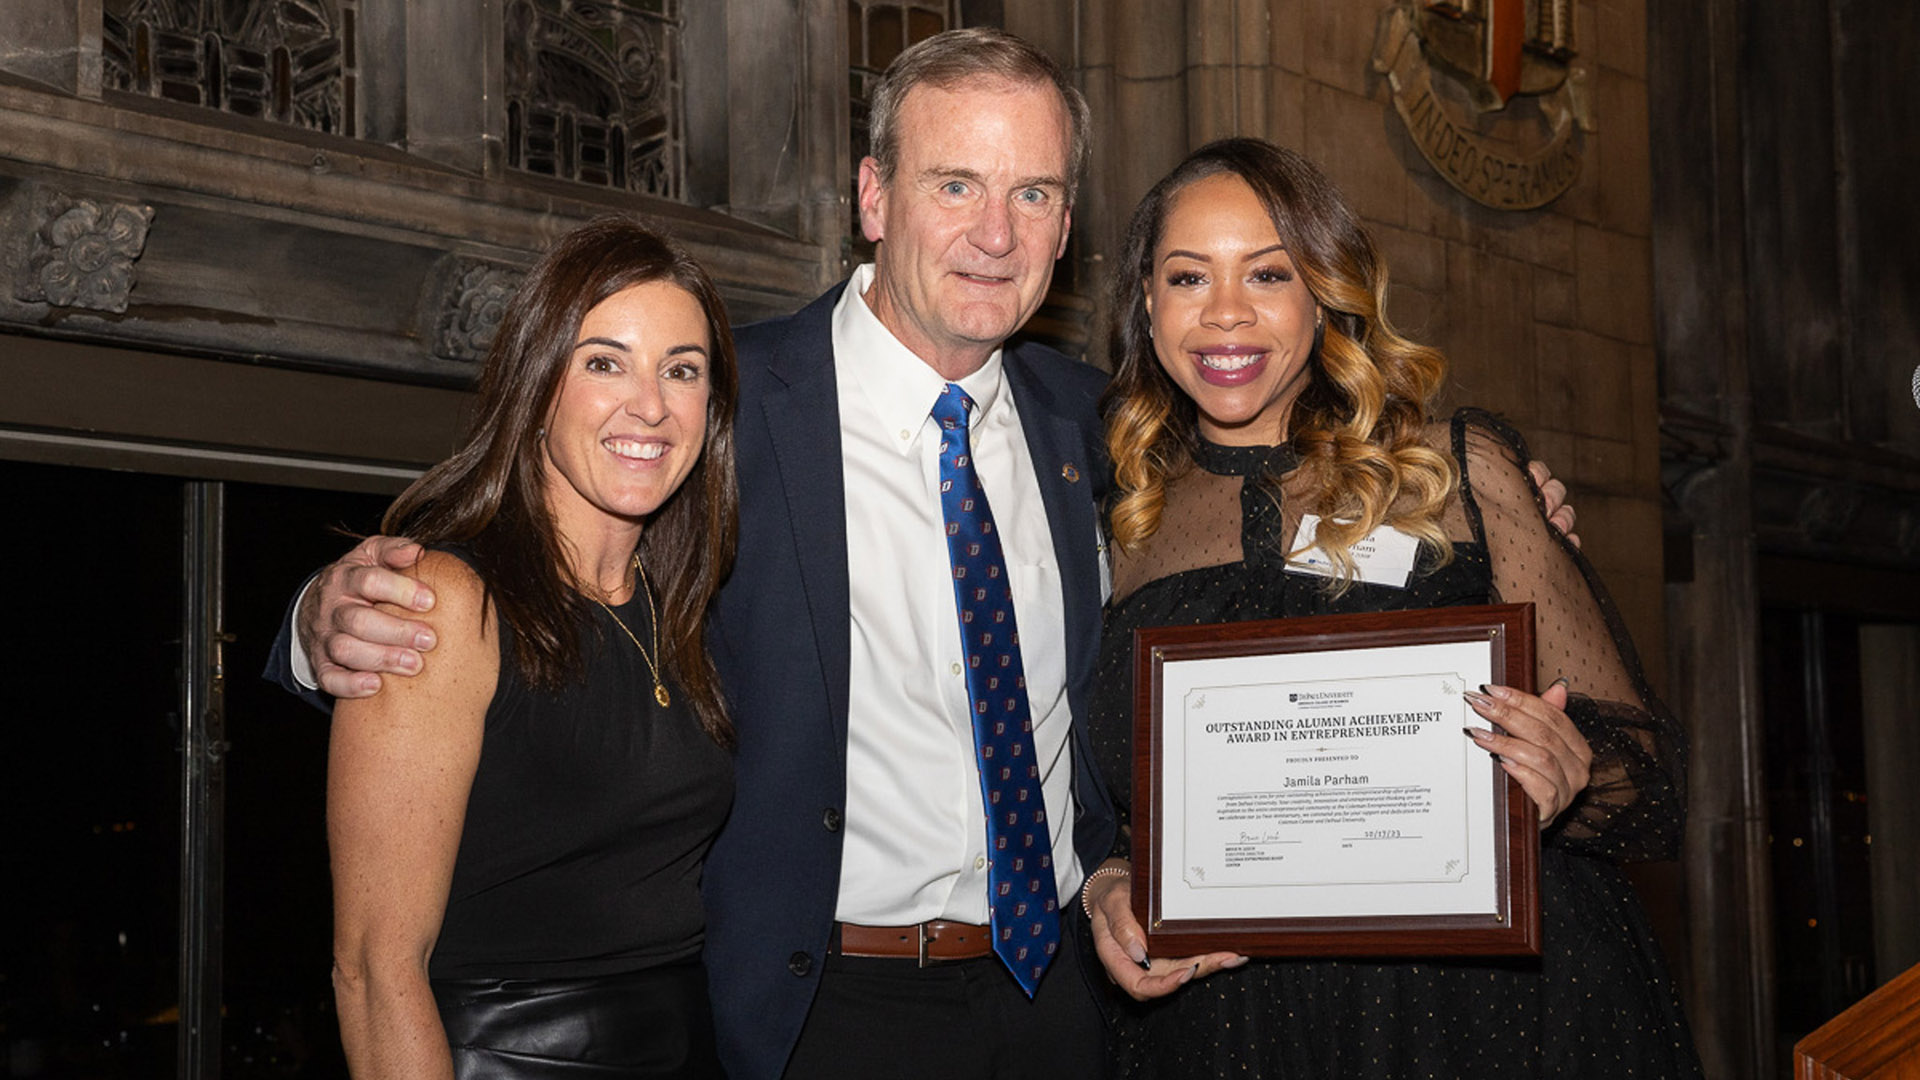 From left to right: Doyle, Leech and alumna Jamila Parham, recipient of an award for alumni in entrepreneurship and one of the keynote speakers for the night.